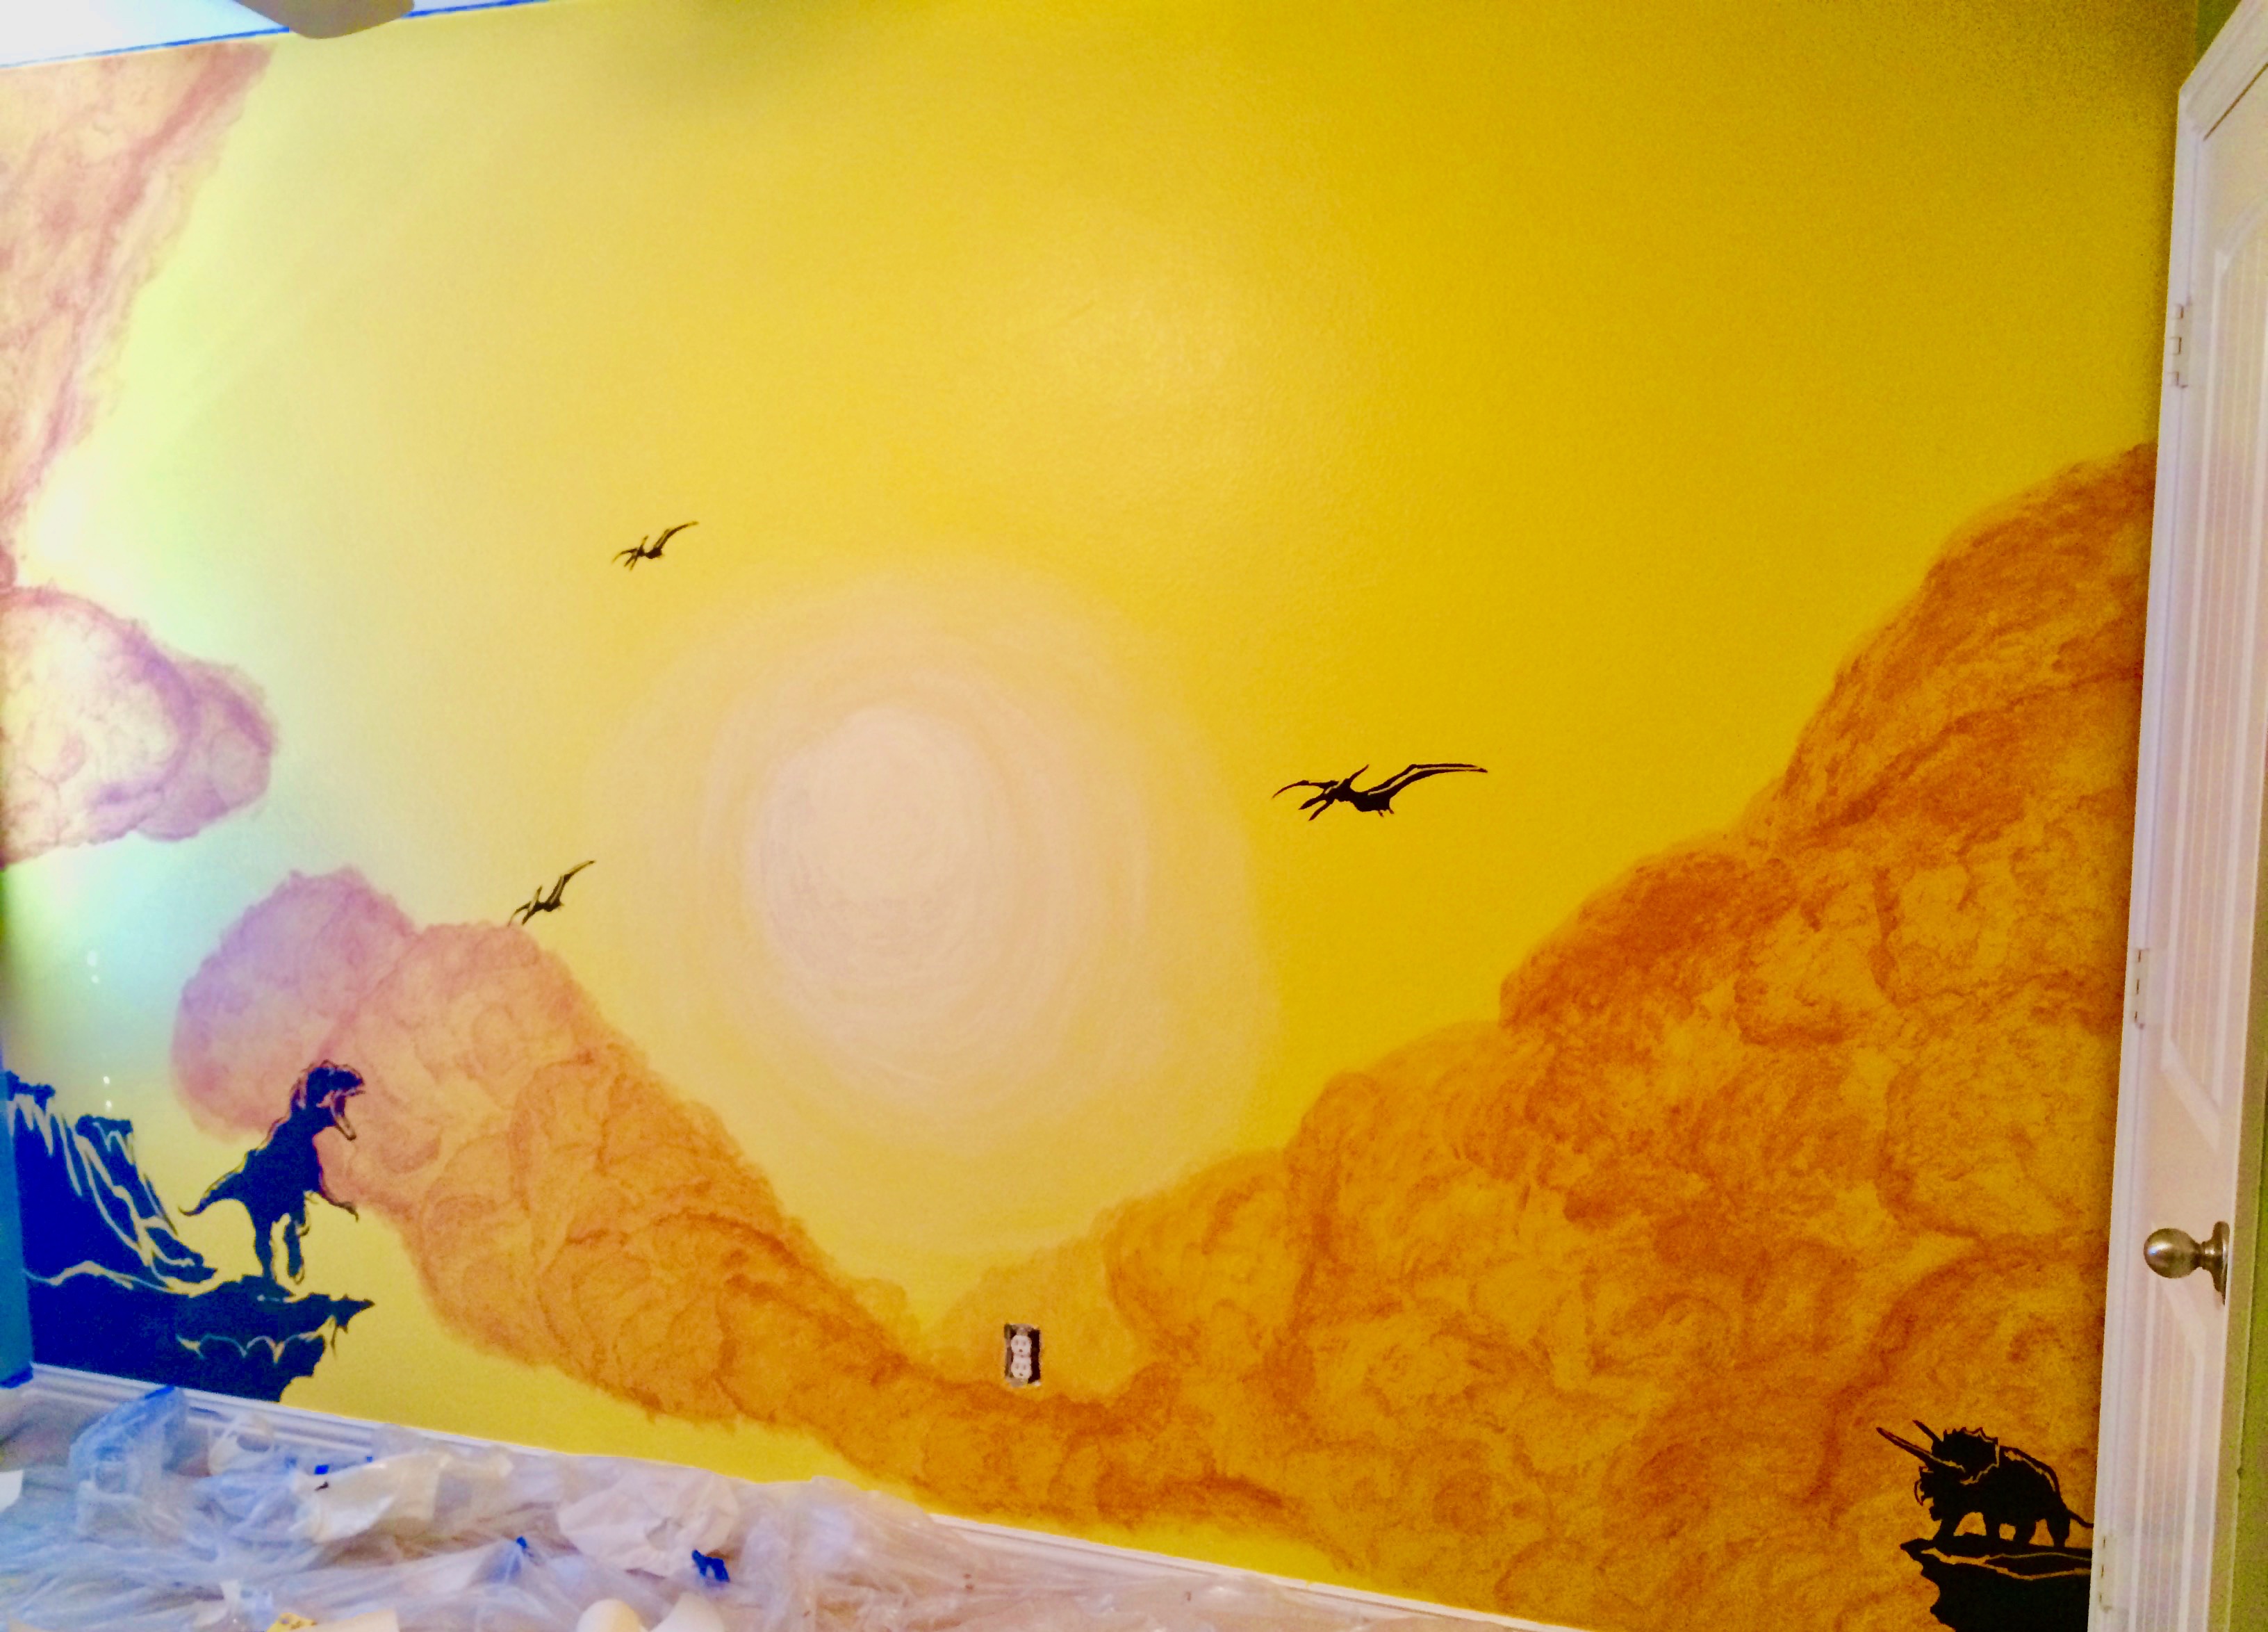 A yellow mural with orange clouds, a pale yellow sun, and black vinyl dinosaurs